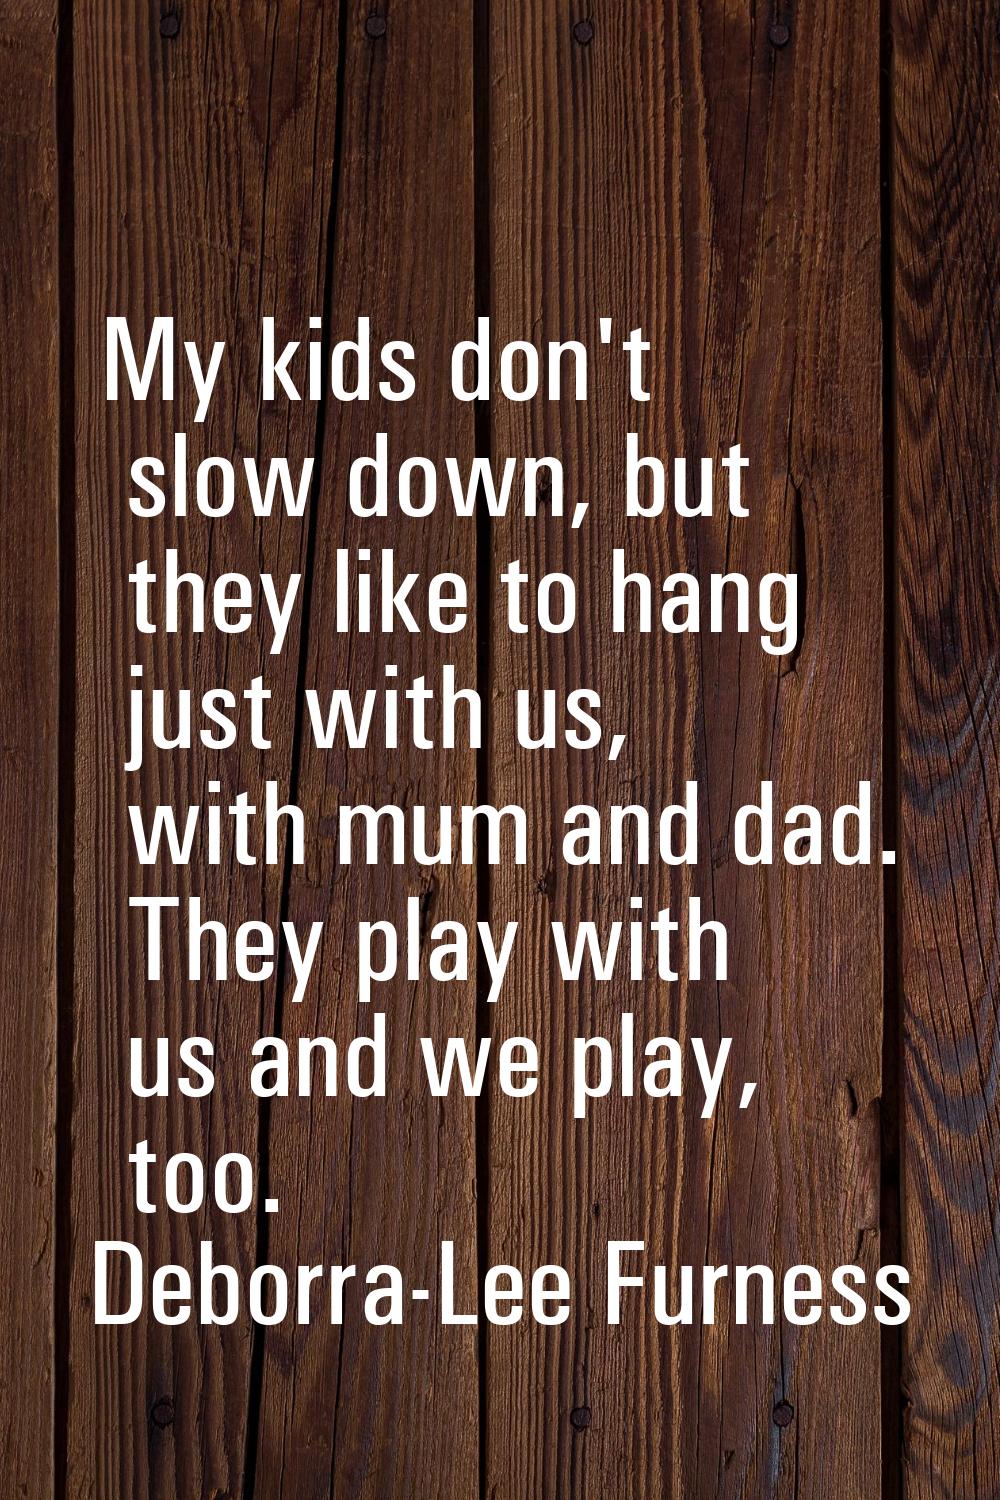 My kids don't slow down, but they like to hang just with us, with mum and dad. They play with us an